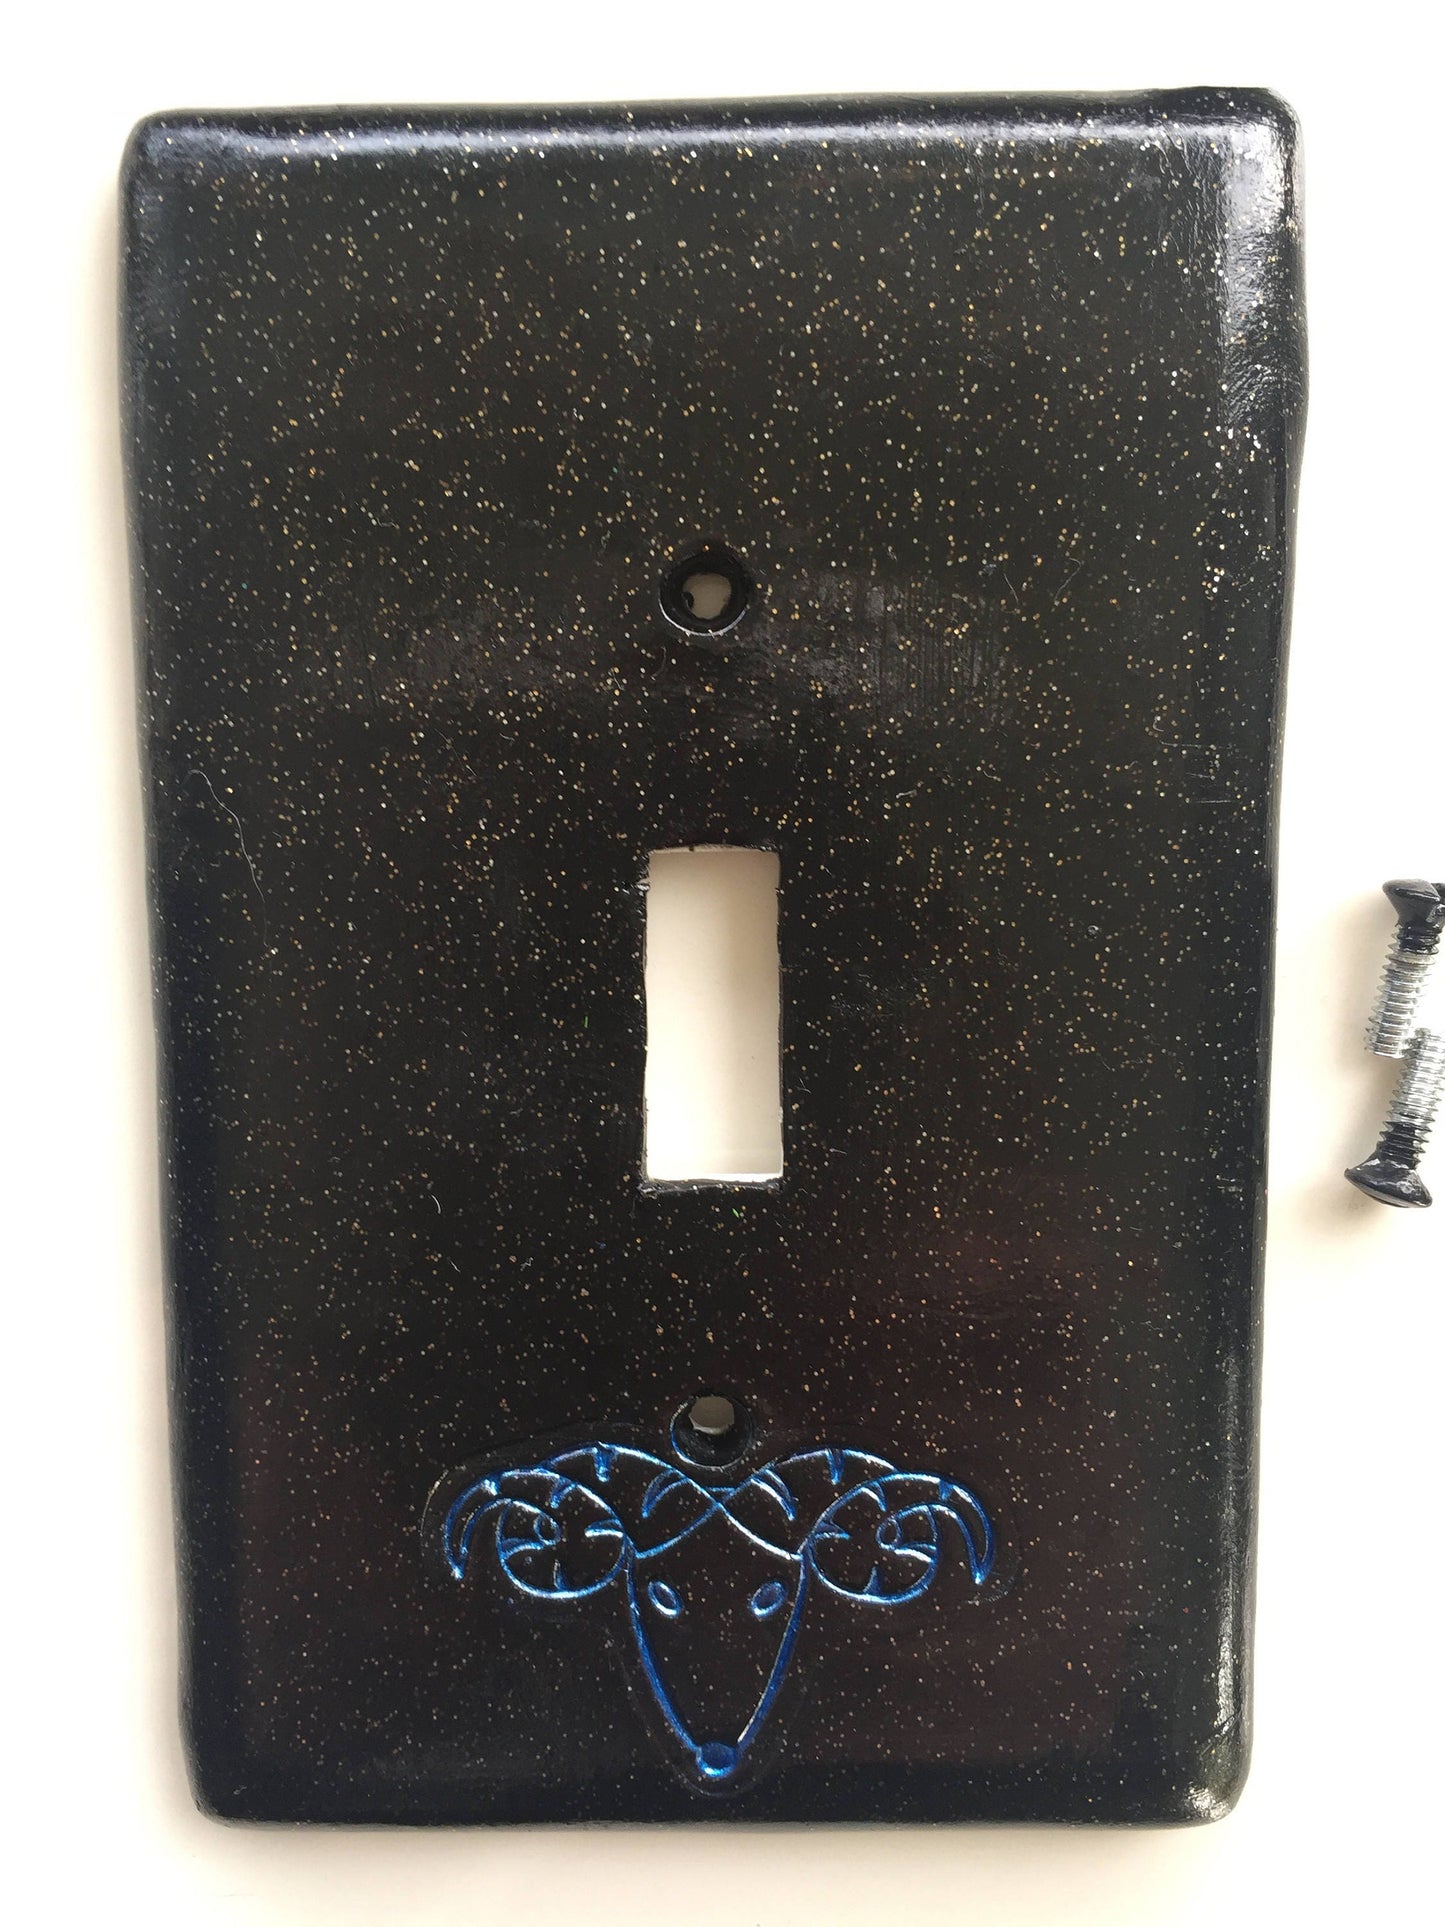 Aries the Ram light switch plate cover for single toggle switch plate cover, black glitter metallic blue custom colors available